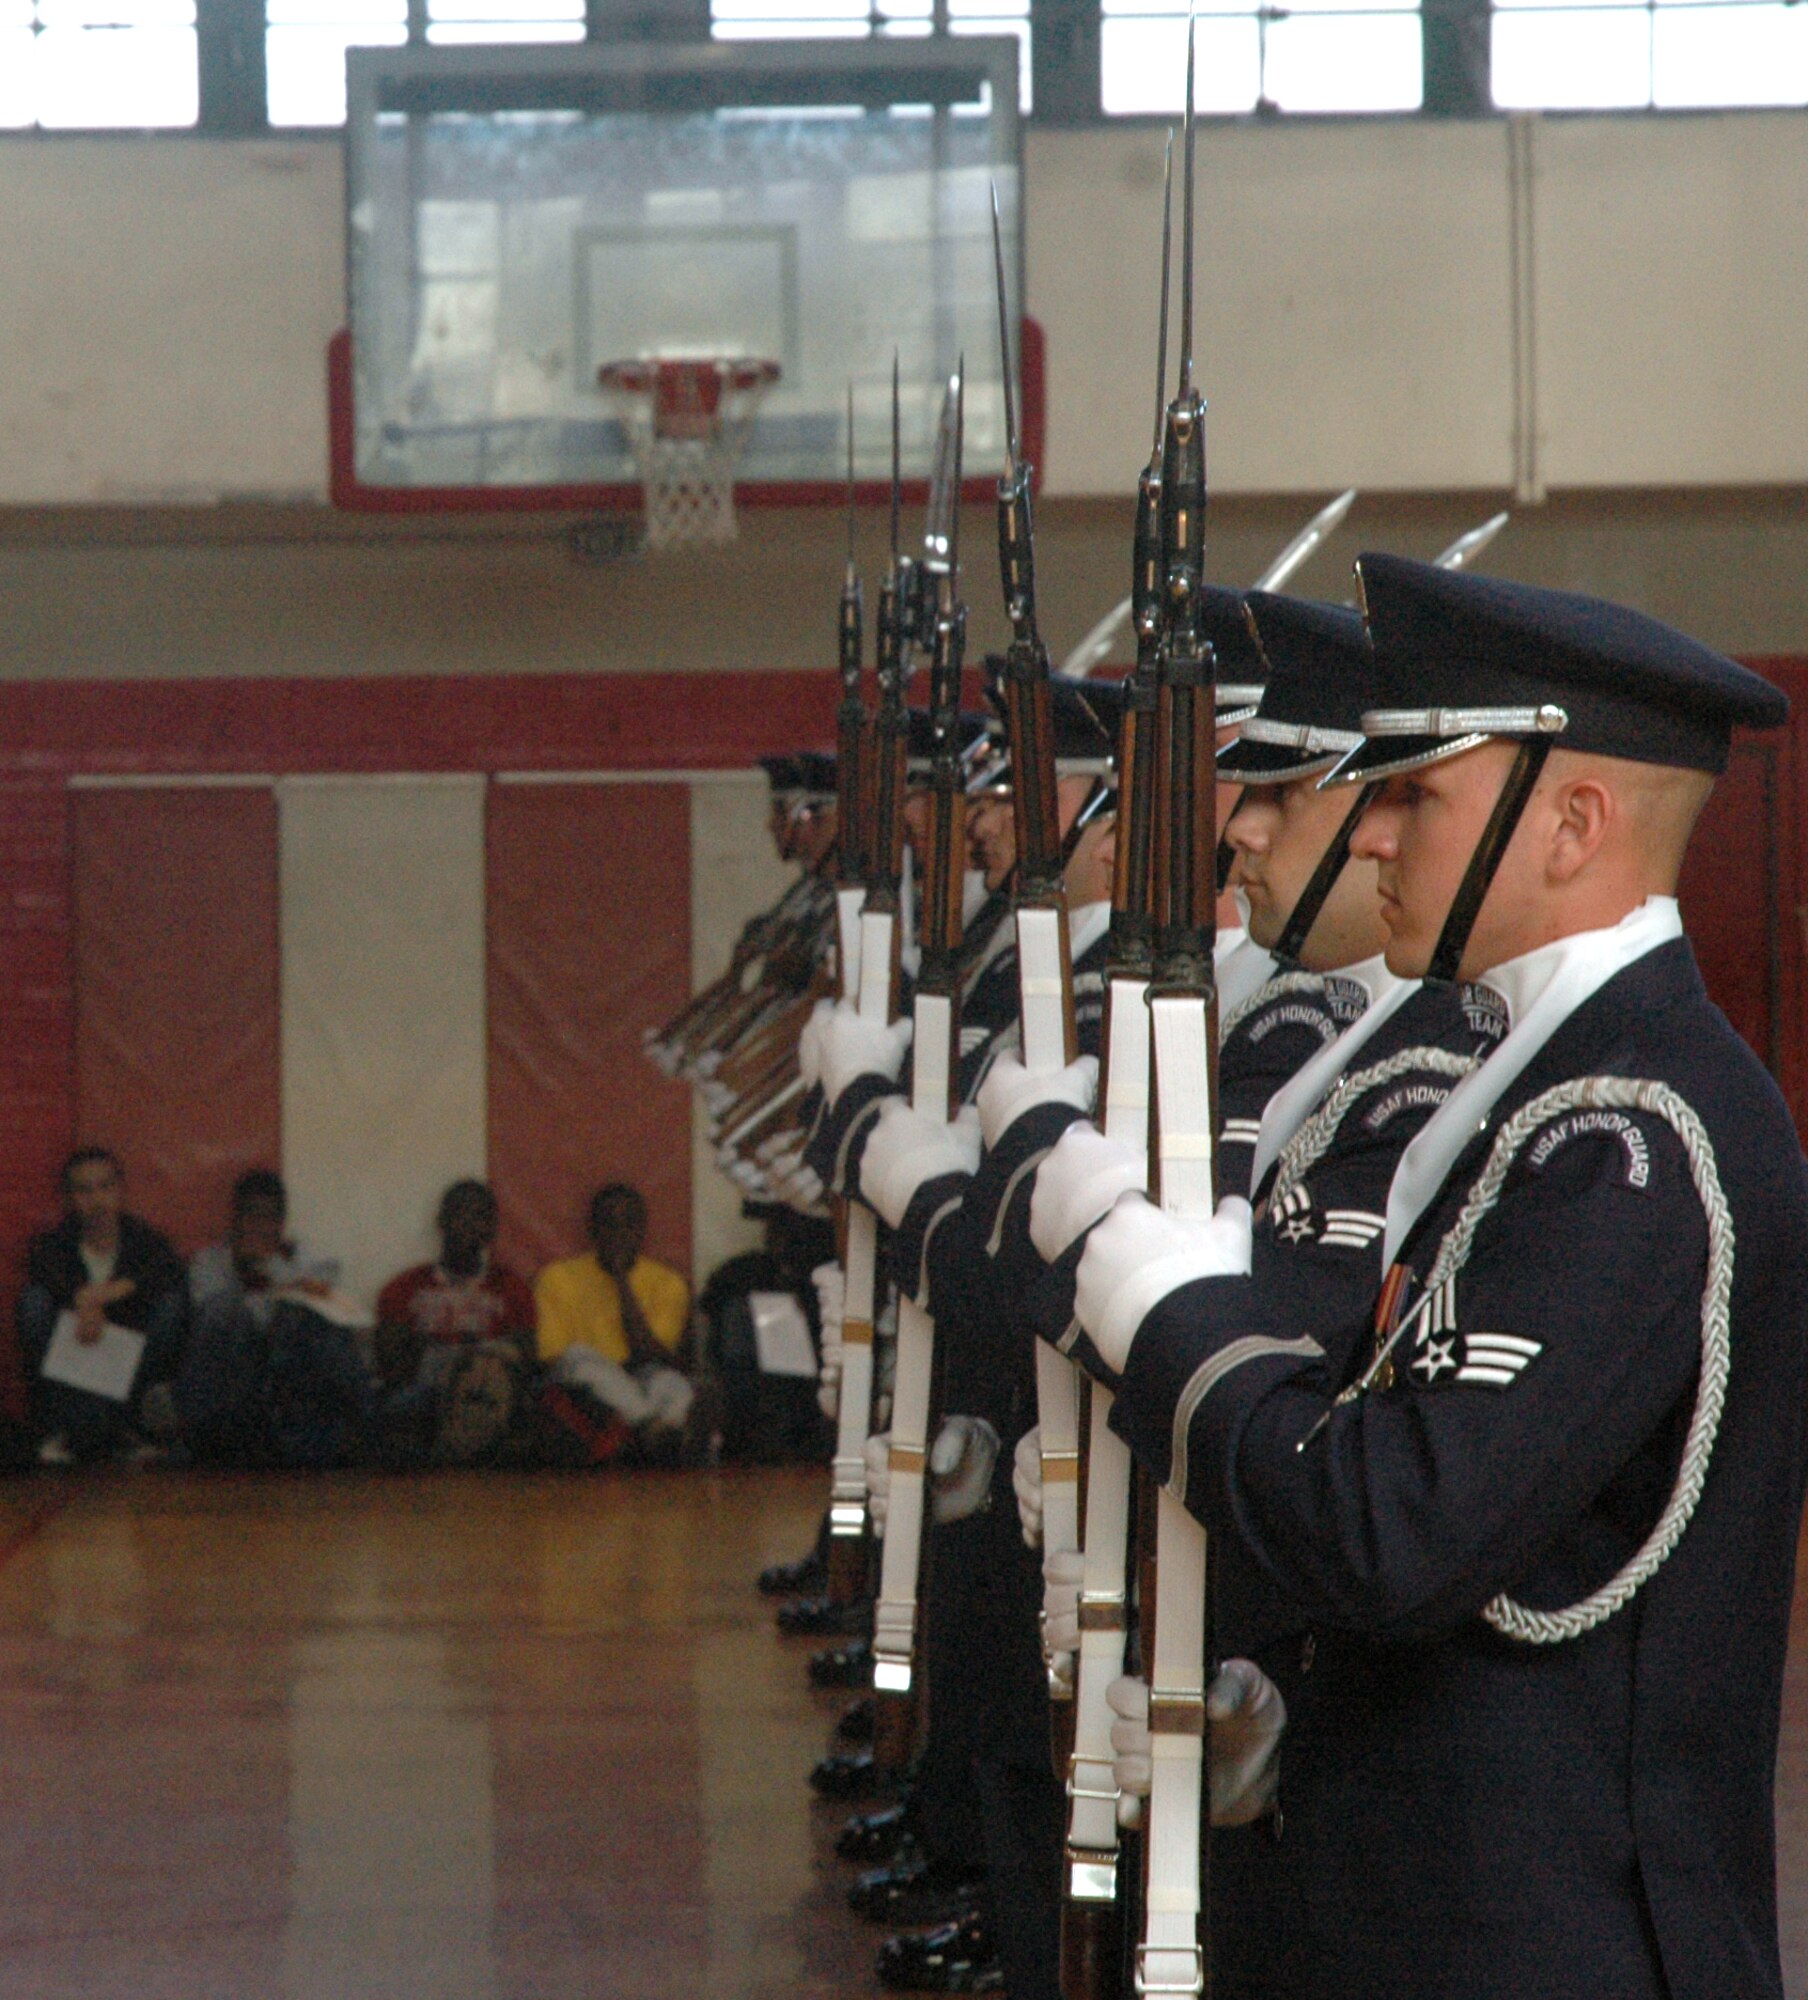 The U.S. Air Force Honor Guard Drill Team performs April 1 at Robert E. Lee High School. The U.S. Air Force Honor Guard Drill Team and the U.S. Air Force Band Max Impact joined forces for the first time to showcase their skills in two joint performances in the Southeast region. (U.S. Air Force photo by Senior Airman R. Michael Longoria)